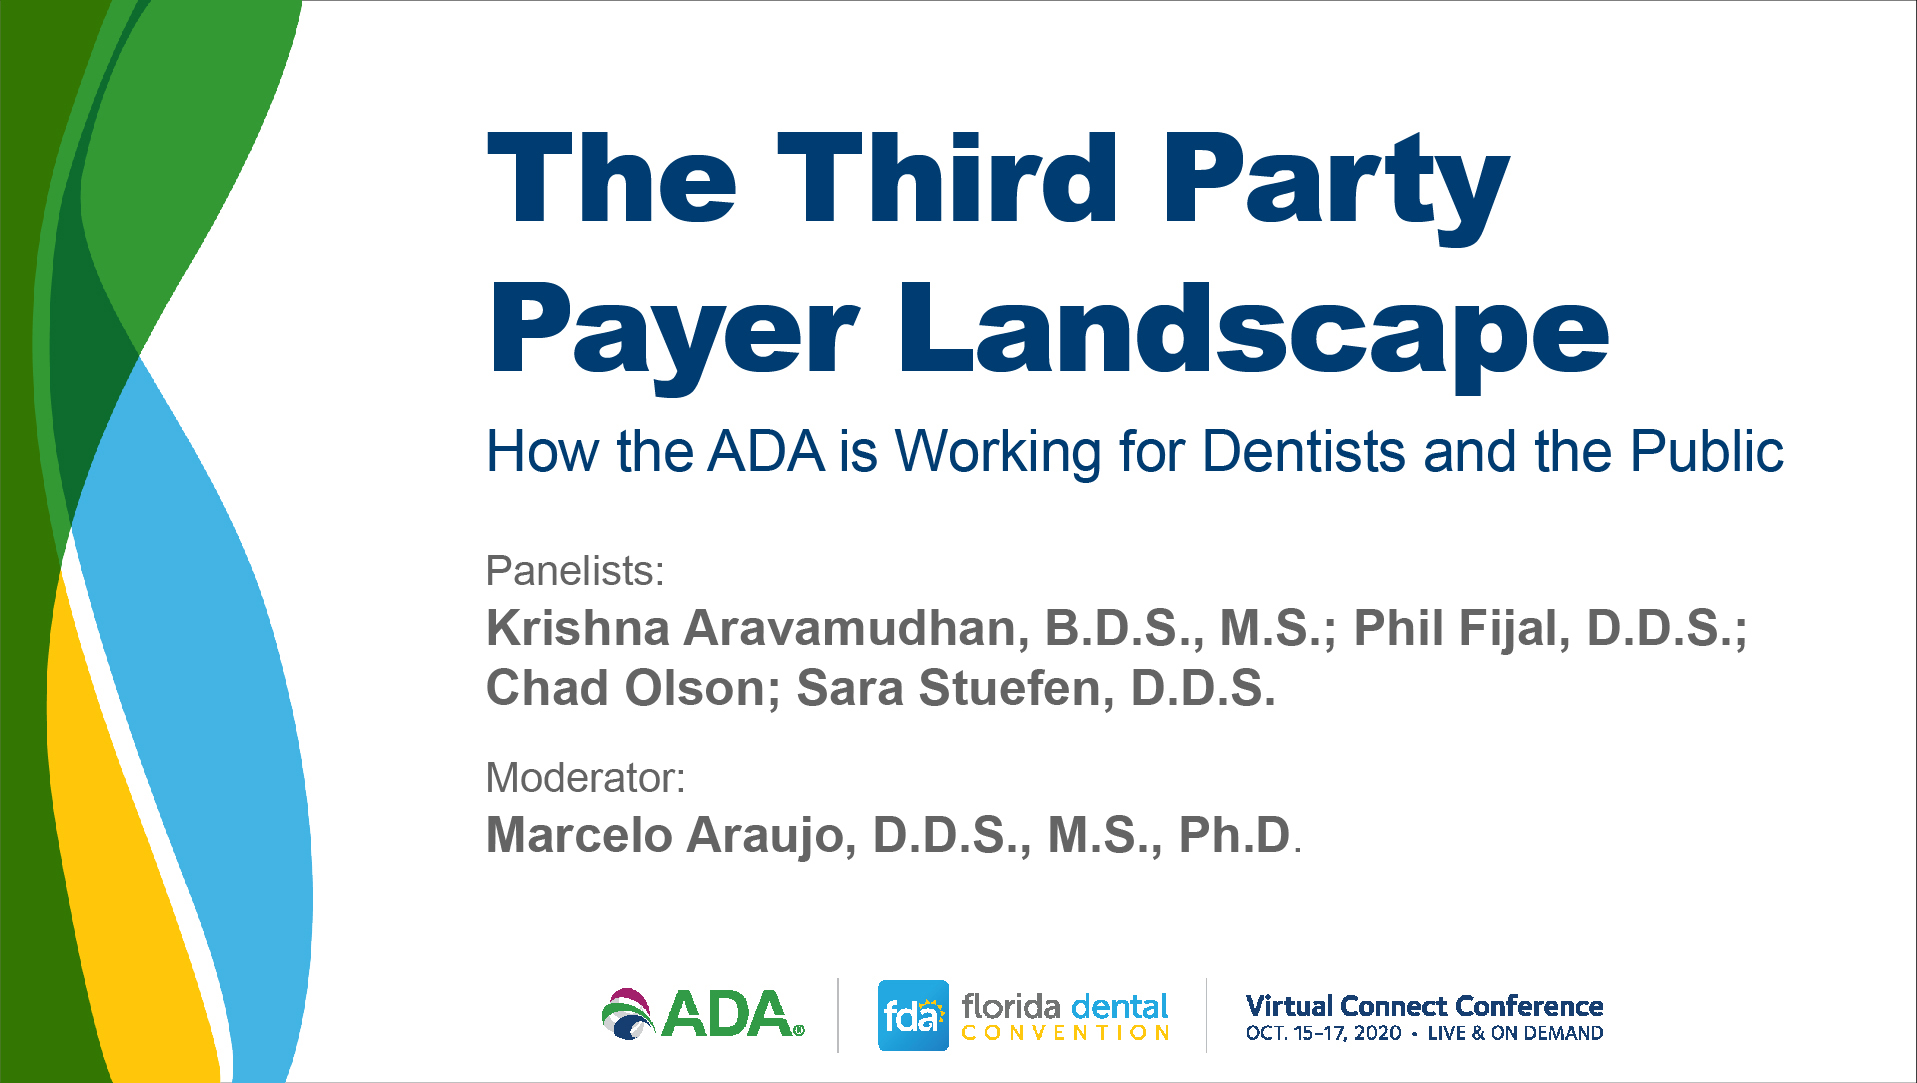 The Third Party Payer Landscape — How the ADA is Working for Dentists and the Public (2020 VCC Closing Session)